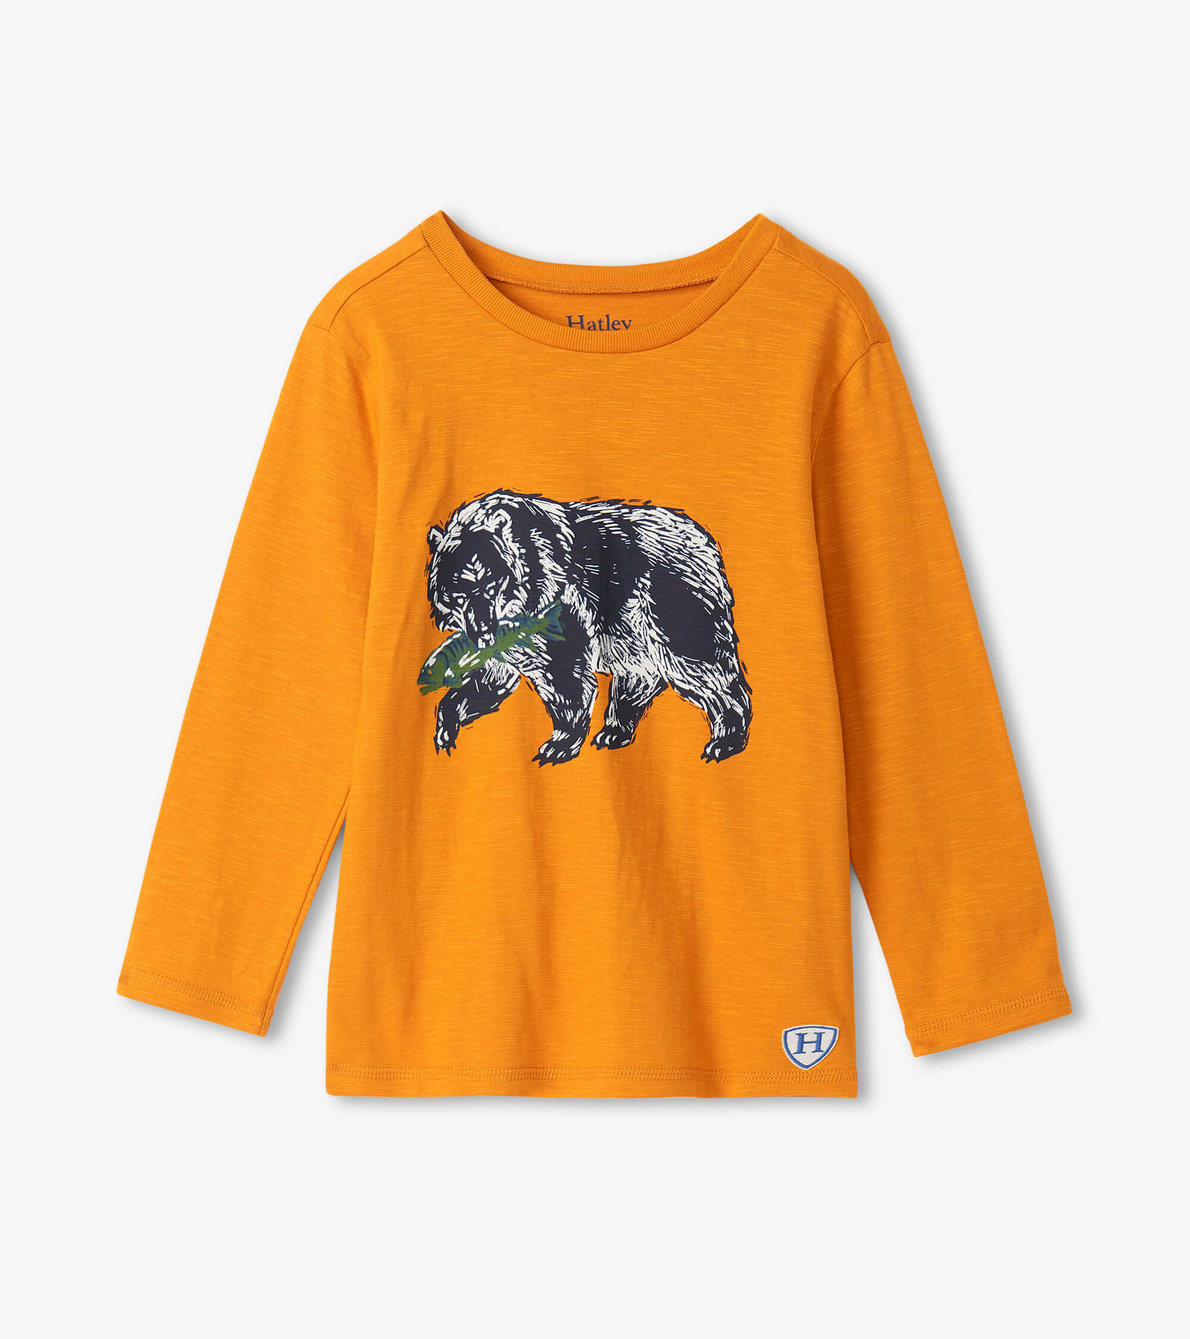 View larger image of Grizzly Bear long sleeve tee